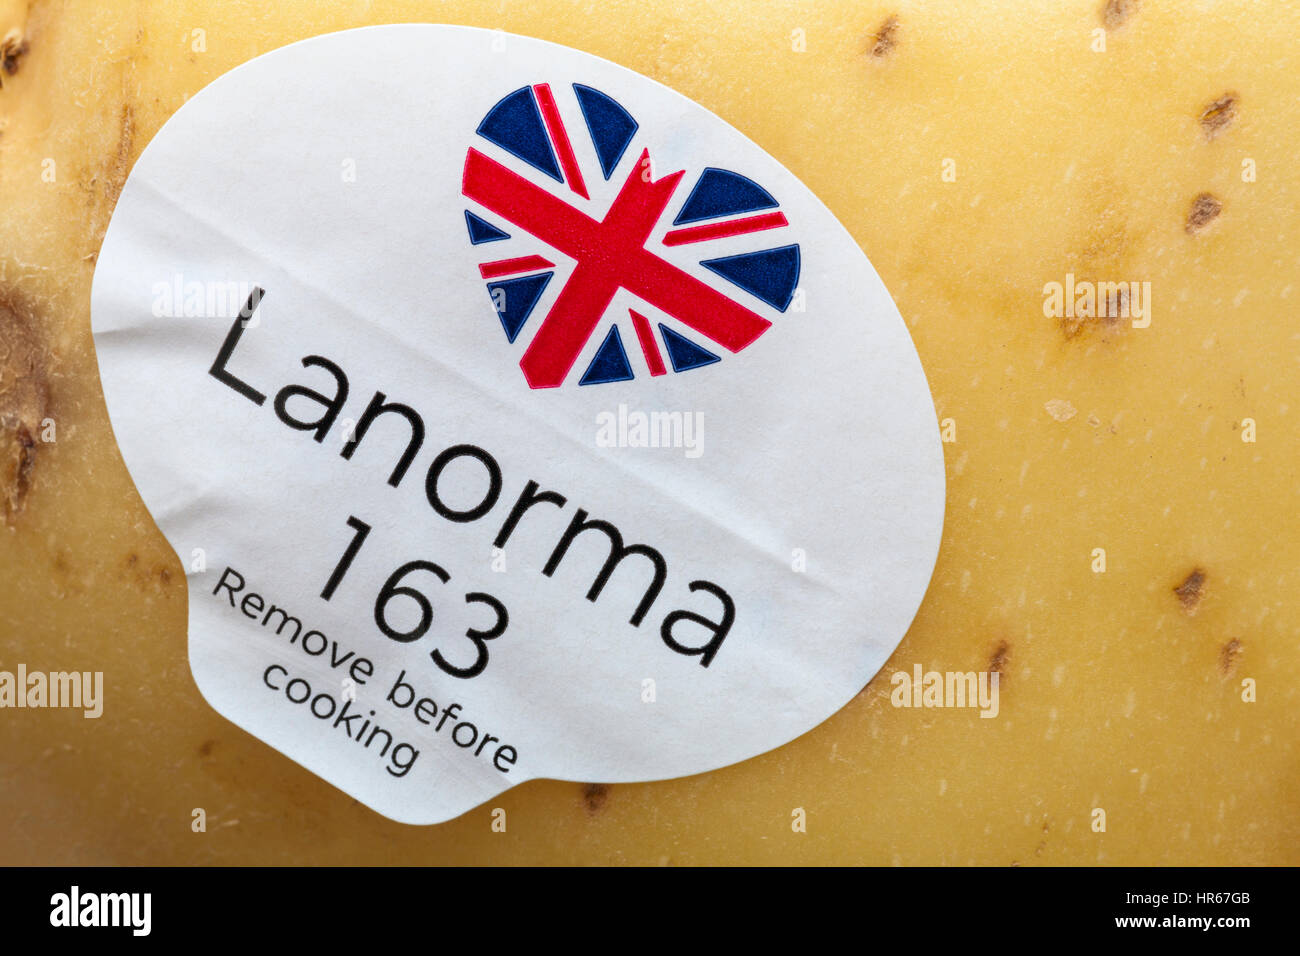 Lanorma remove before cooking with Union Jack heart sticker on Lanorma potato Stock Photo